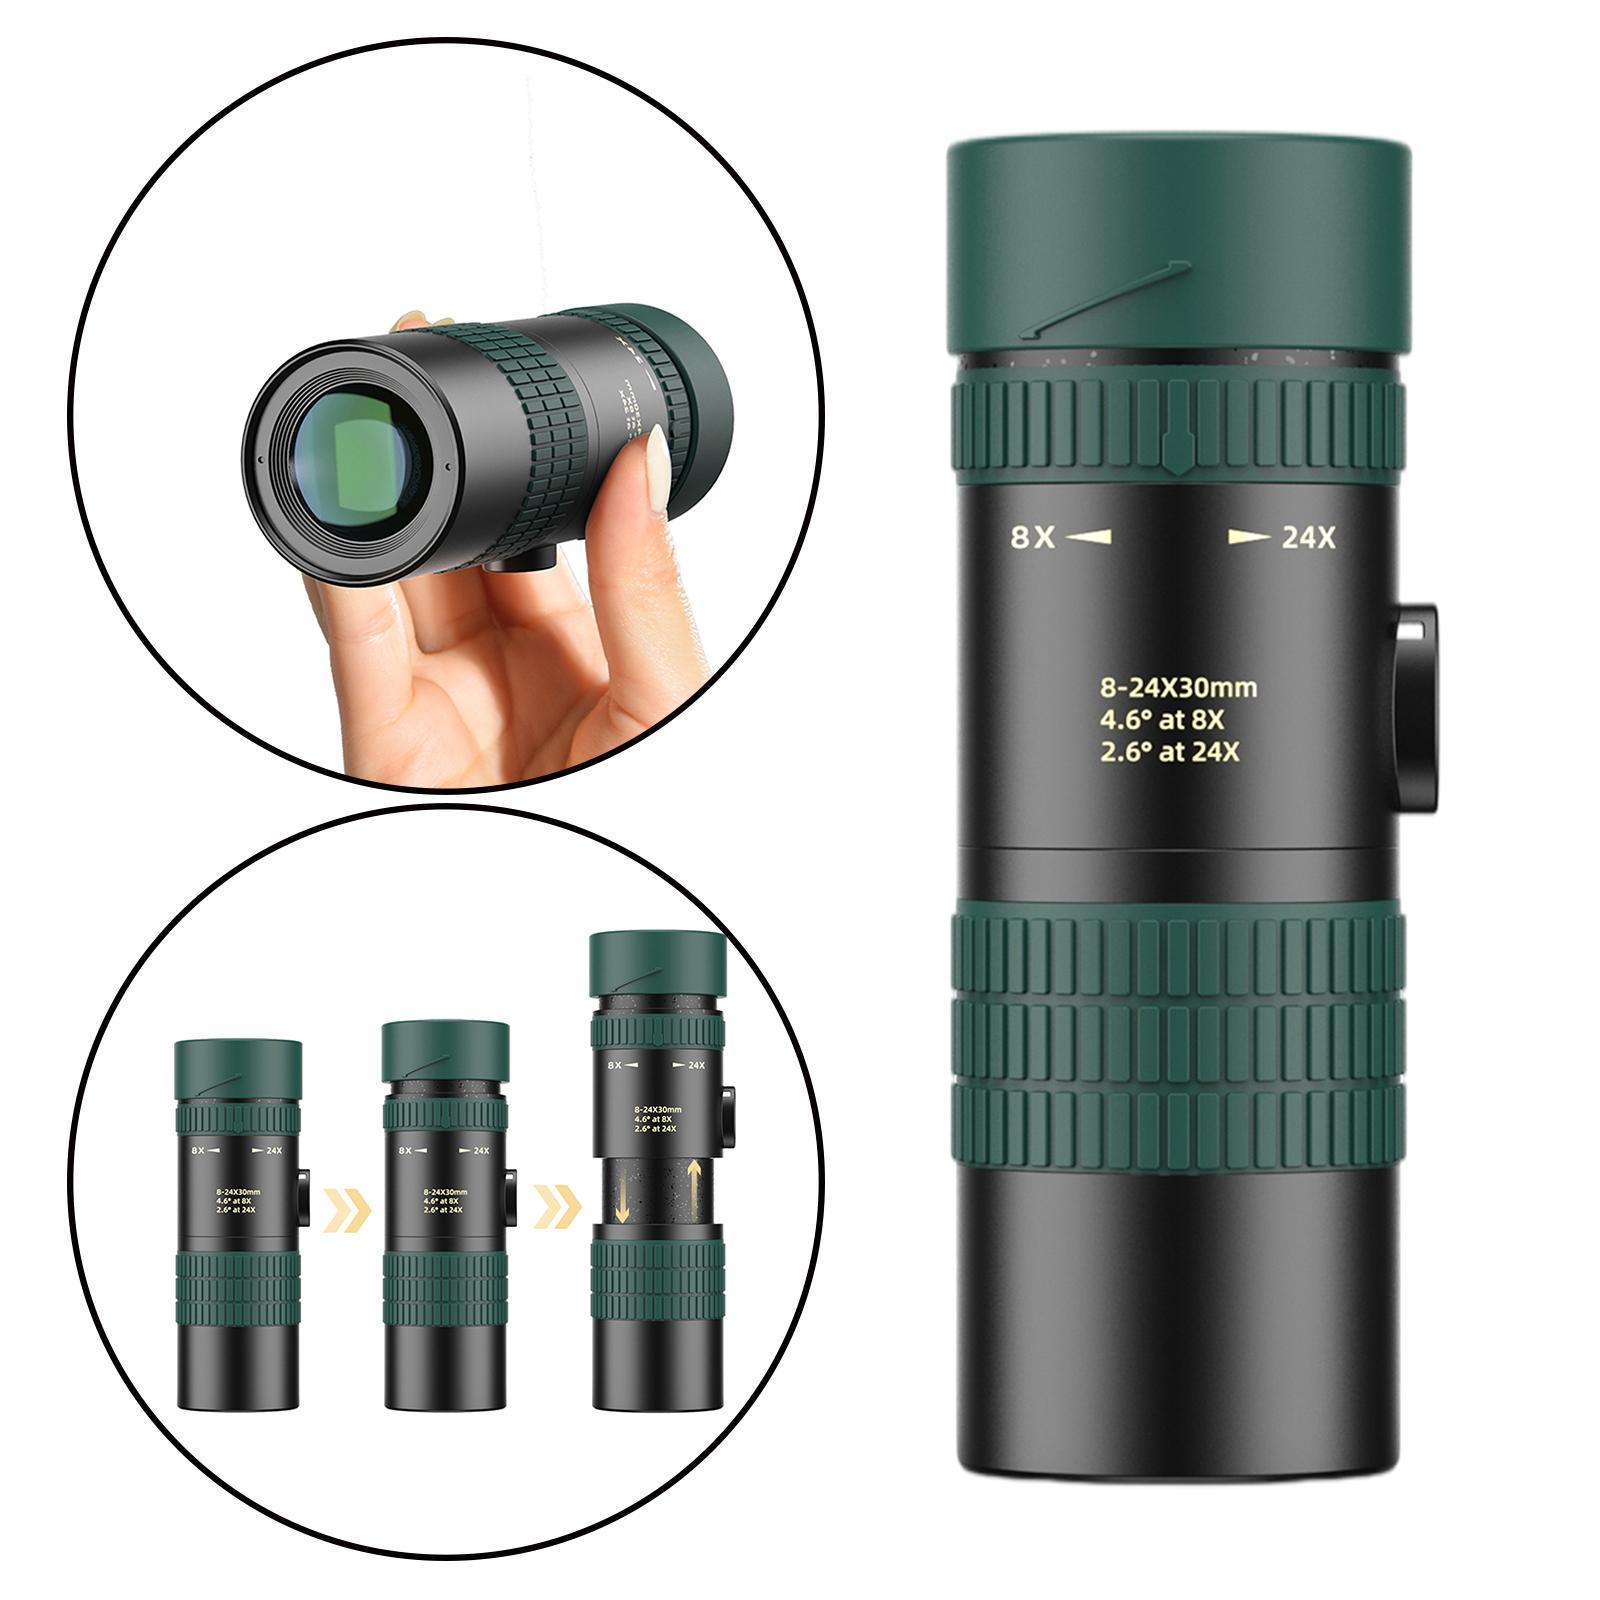 8-24X30 Zoom Monocular High Power Scope with Bak4 Prism for Bird Watching Traveling Concert Hiking Game Compact Waterproof Telescope Gifts for Men